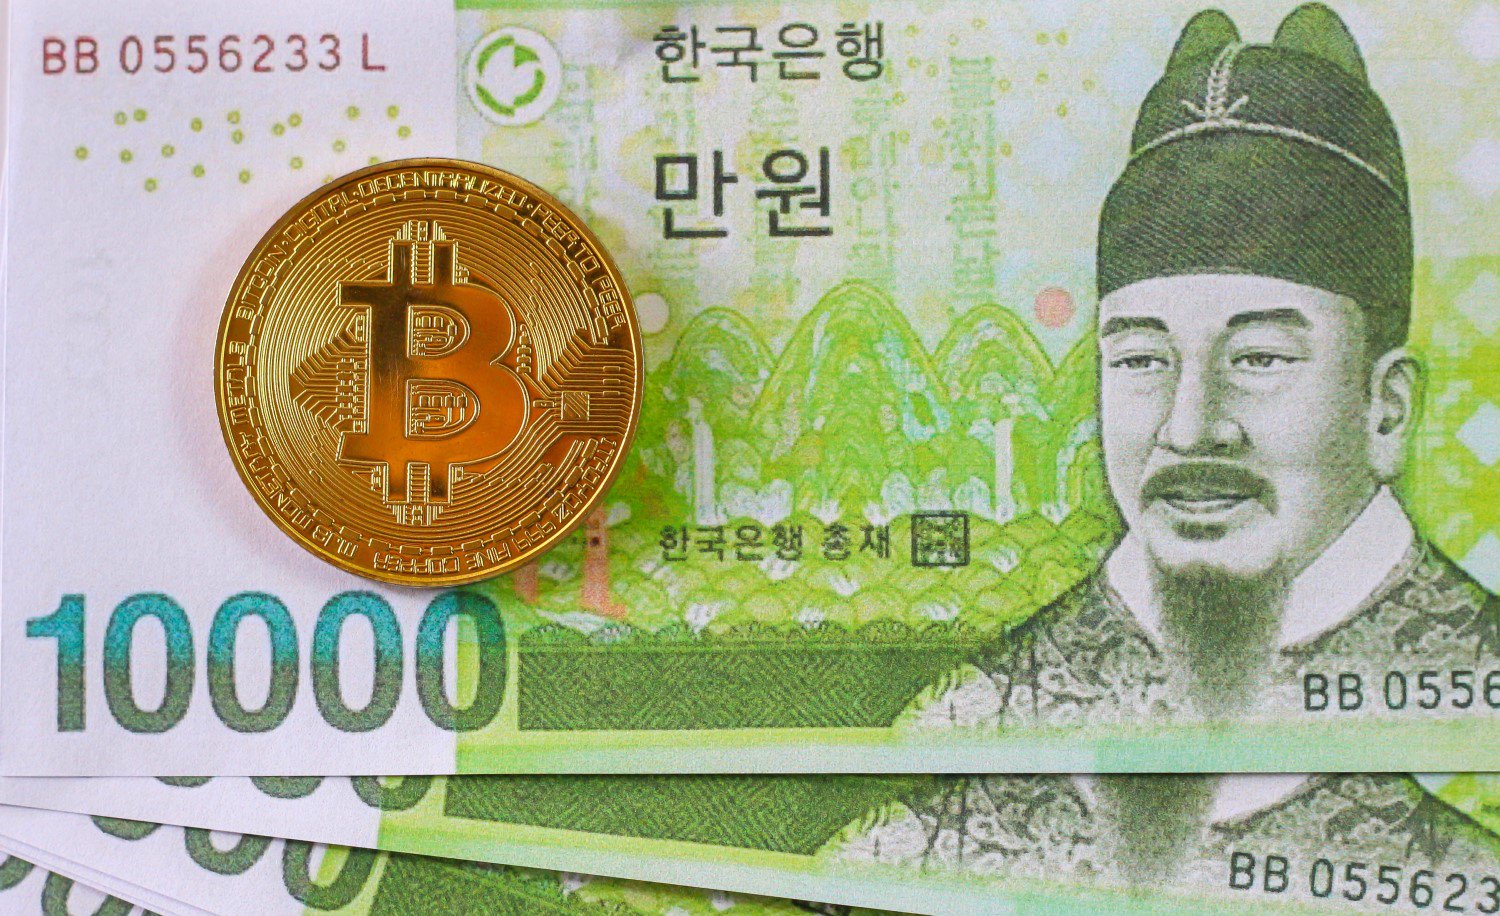 South Korea’s Financial Watchdog Warns Investors Over Crypto Funds